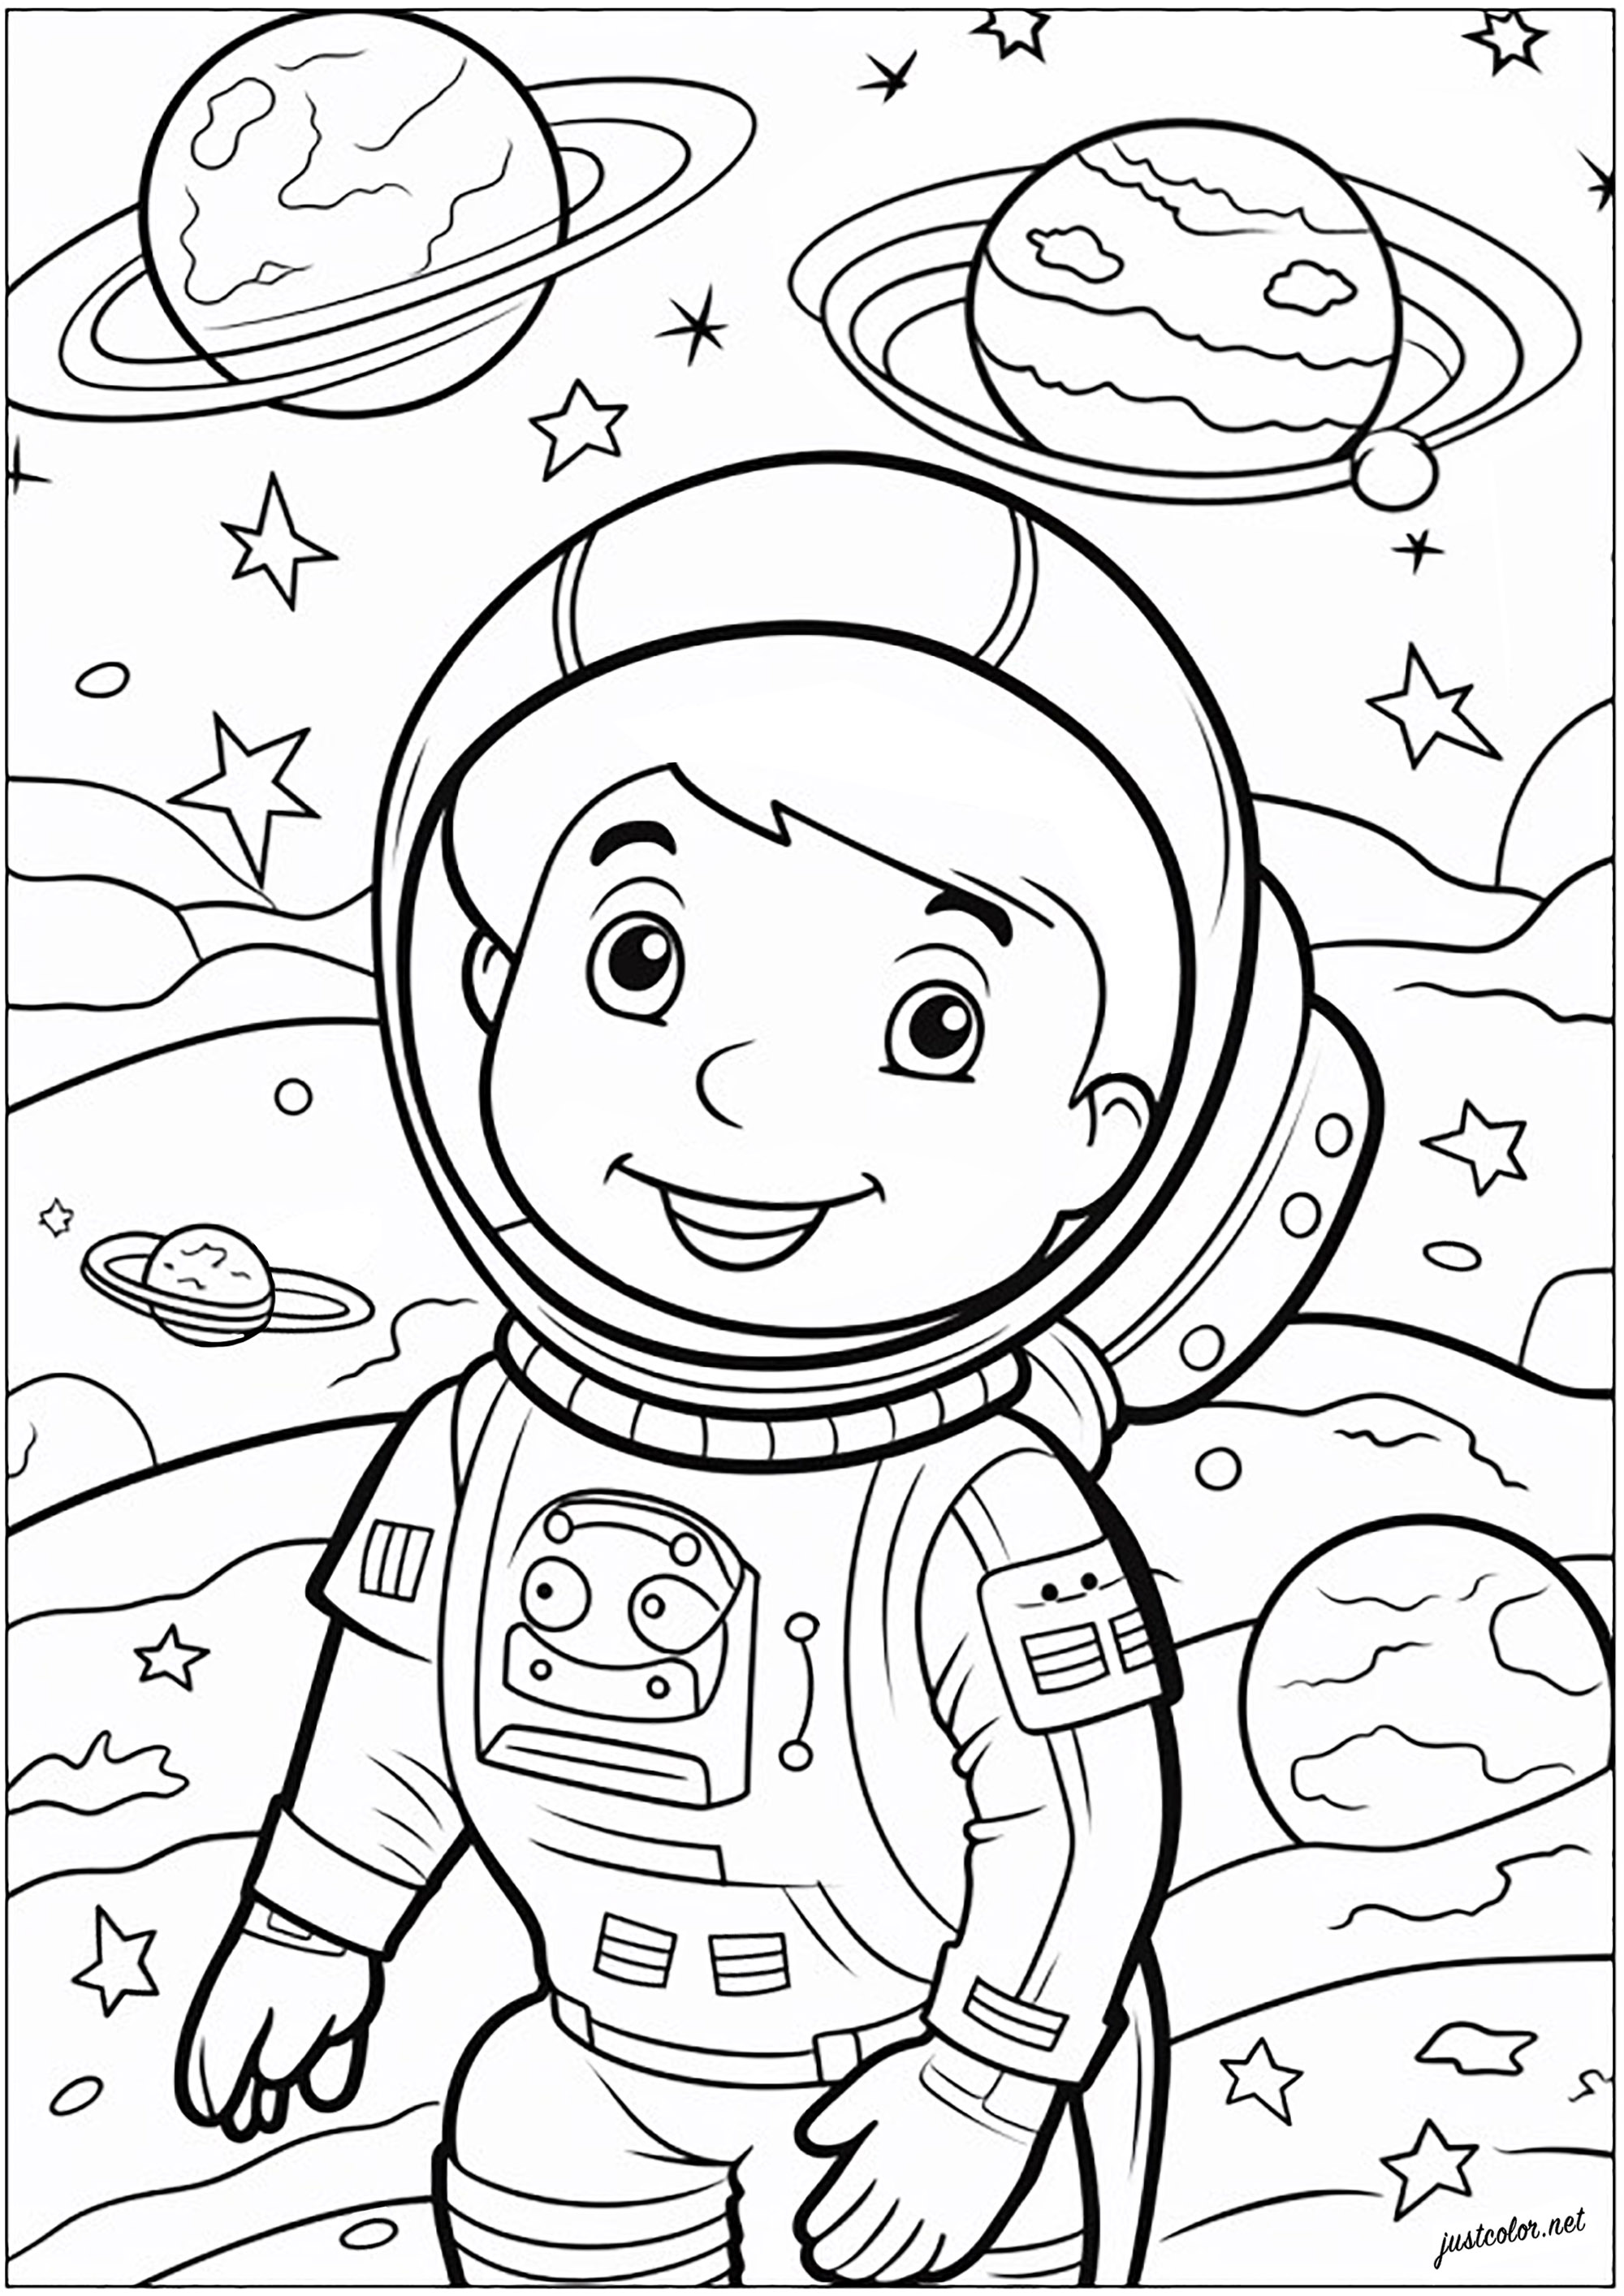 Coloring of a little astronaut. Young astronaut represented in space, floating among the stars and planets